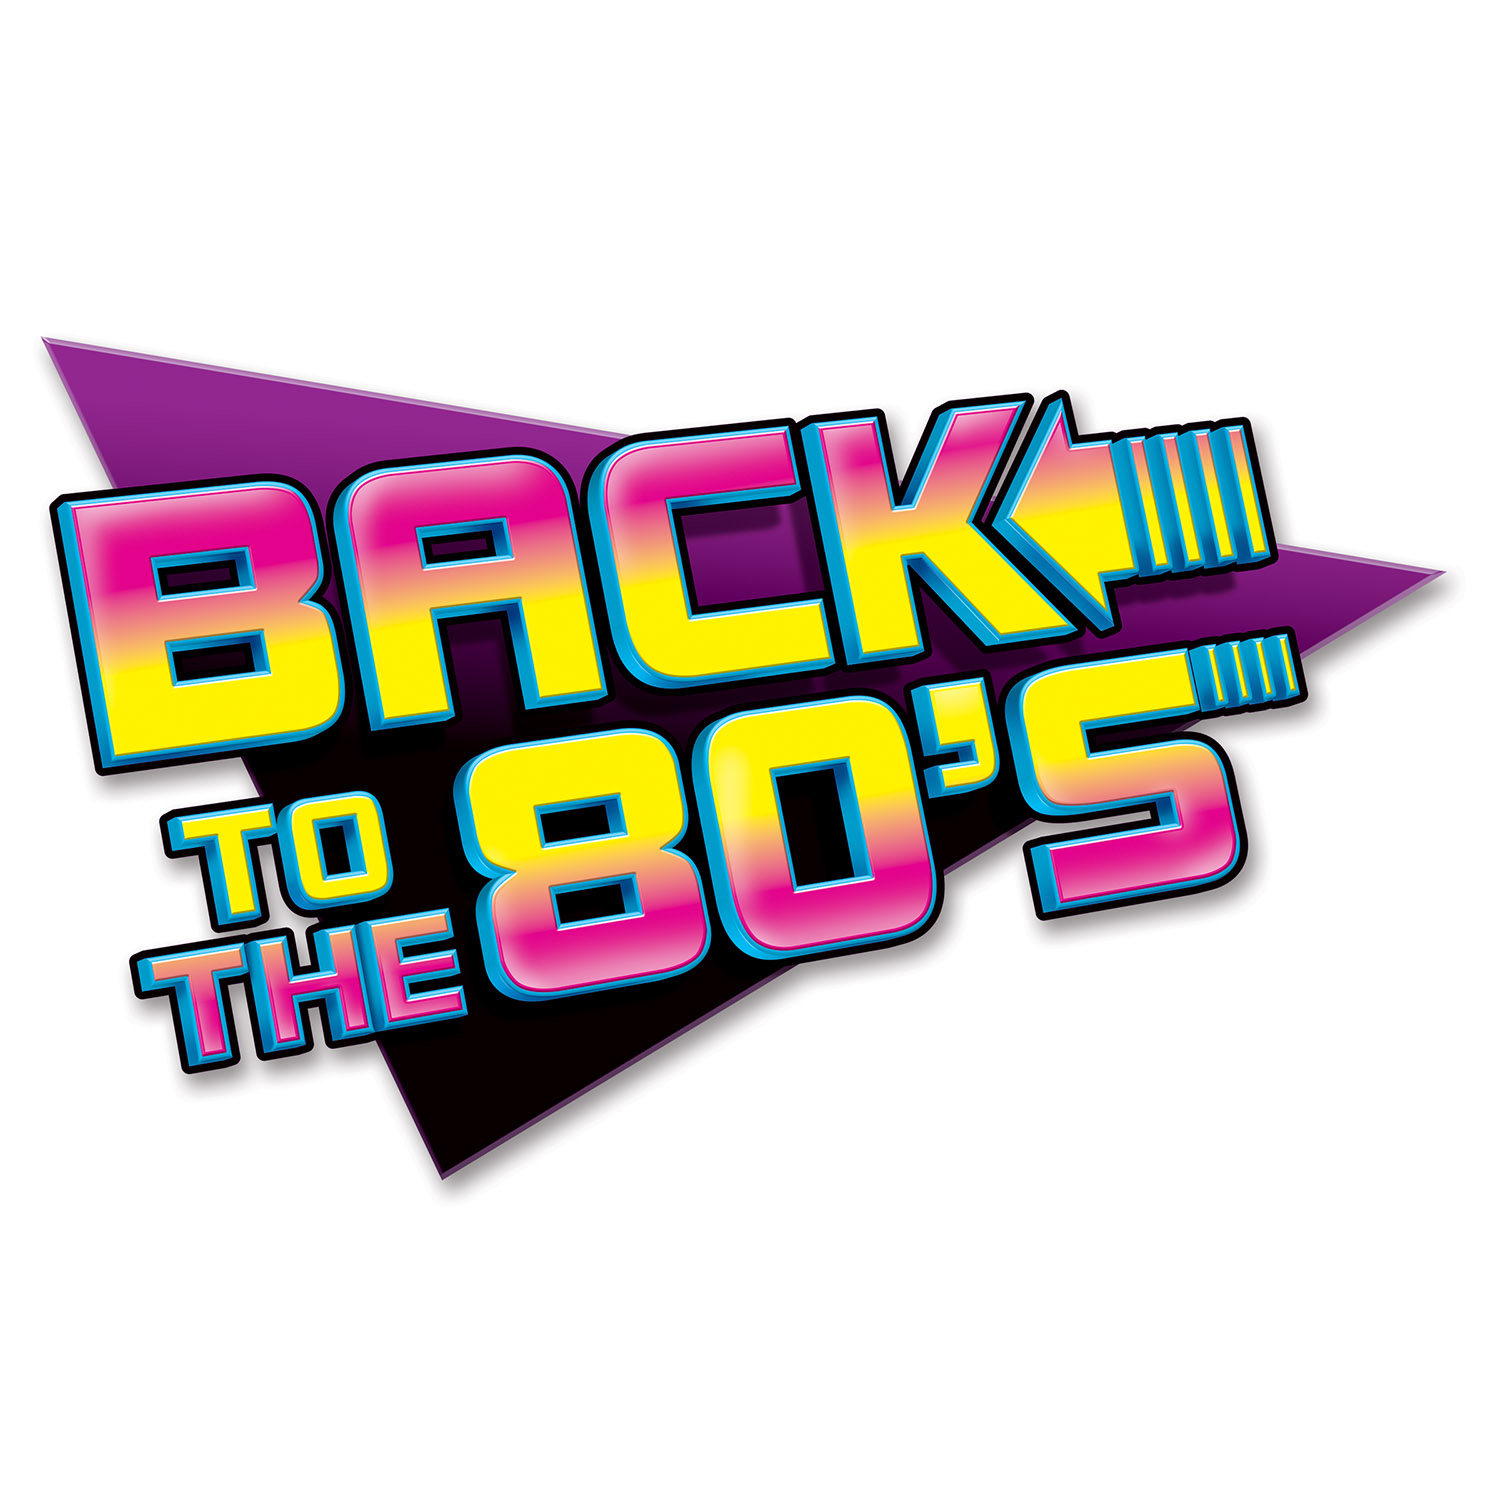 1980s style sign in purple, black and yellow, that reads, "Back to the 80s"